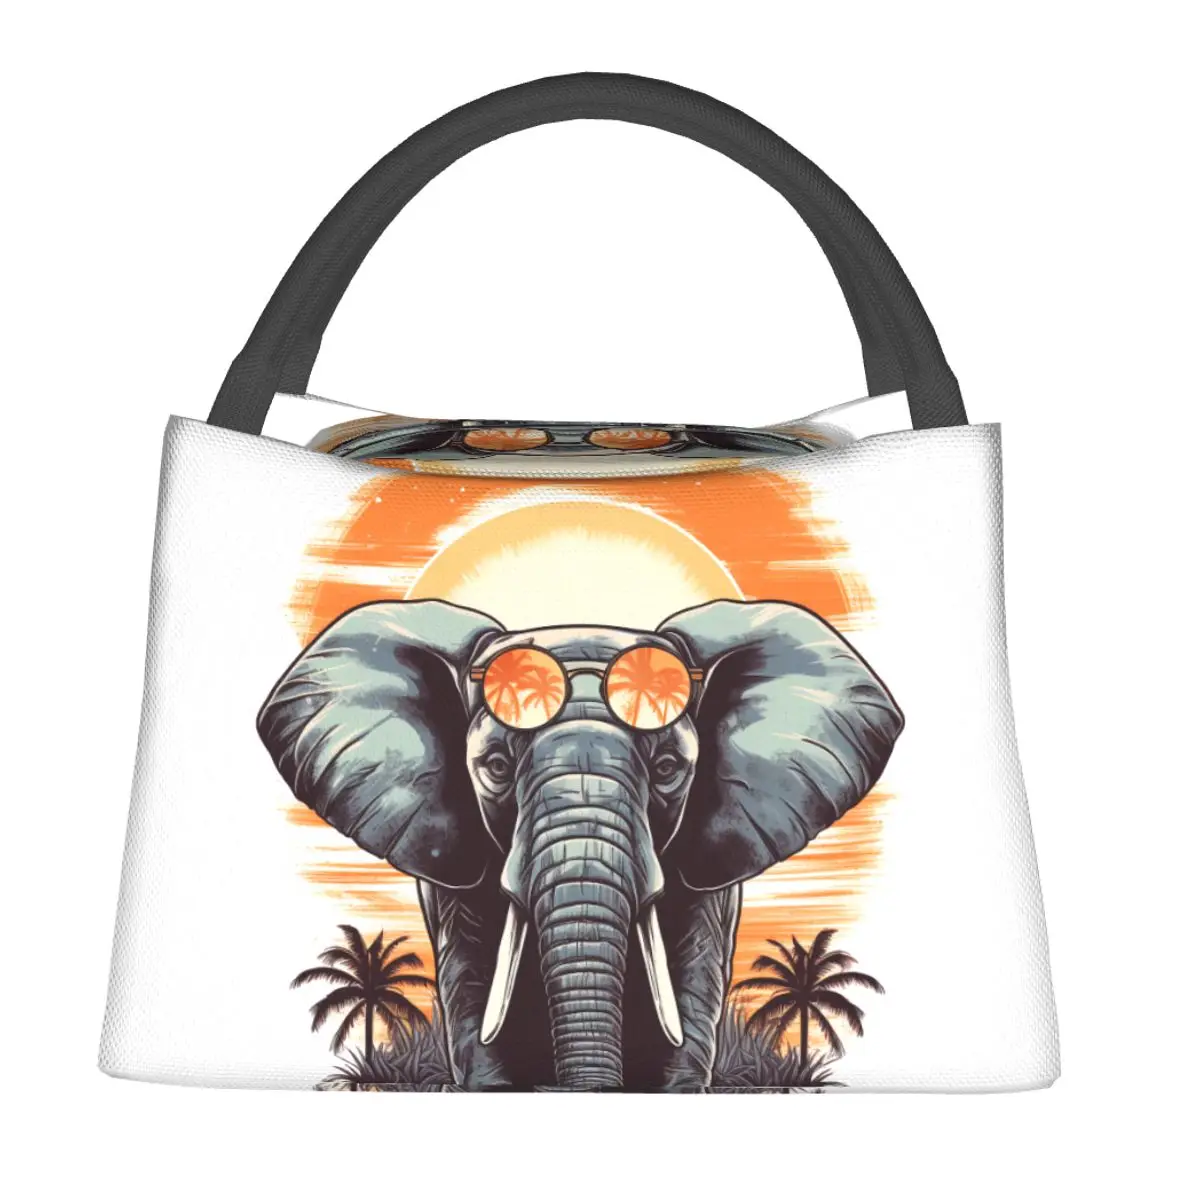 

Elephant Lunch Bag Sunset Animals With Sunglasses Picnic Lunch Box For Men Retro Print Tote Handbags Oxford Portable Cooler Bag